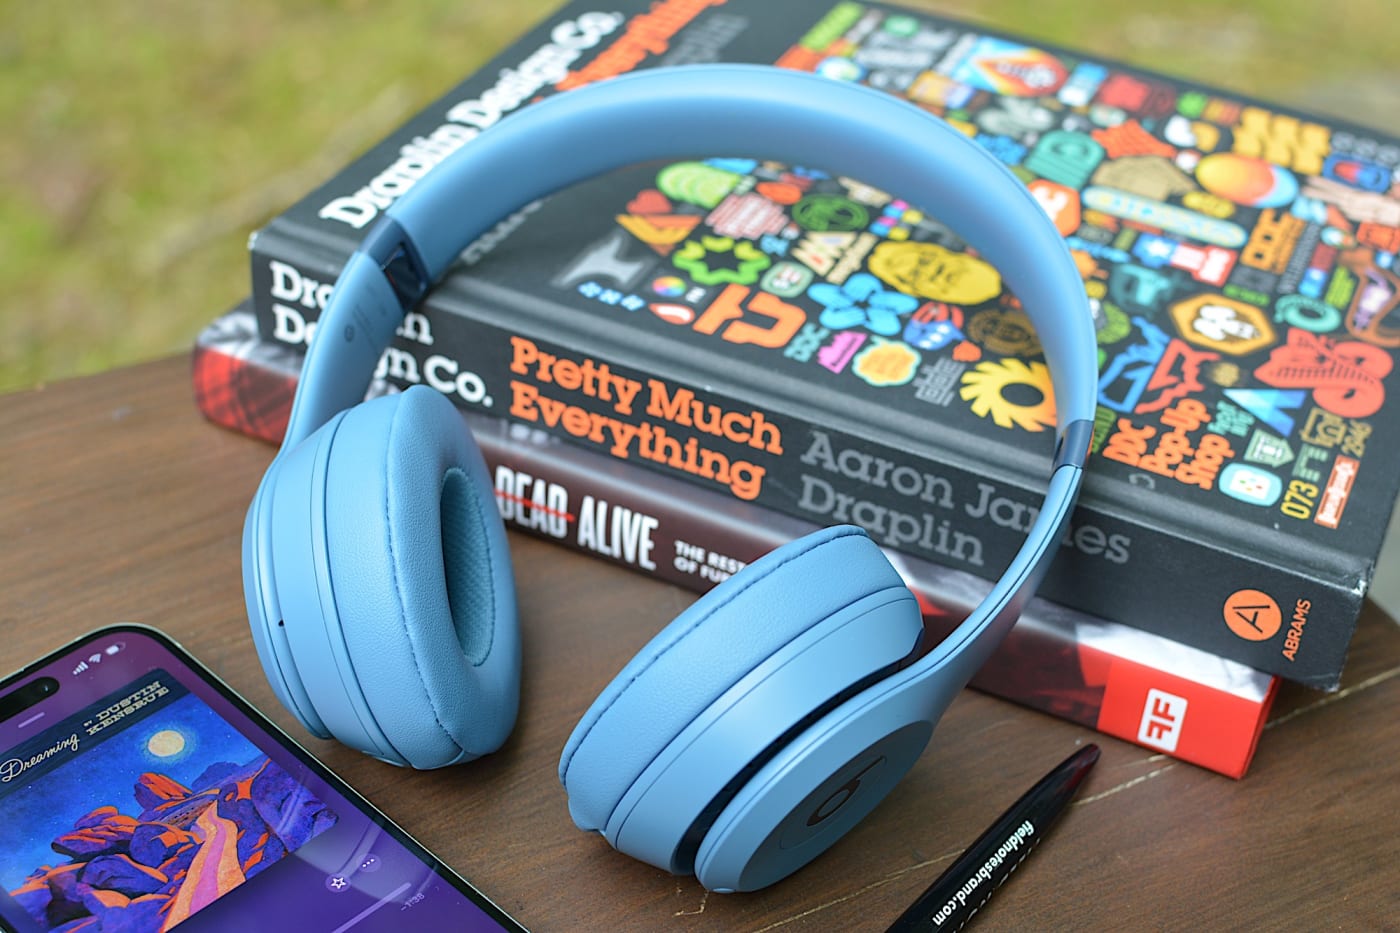 The Morning After: Our verdict on the Beats Solo 4 headphones